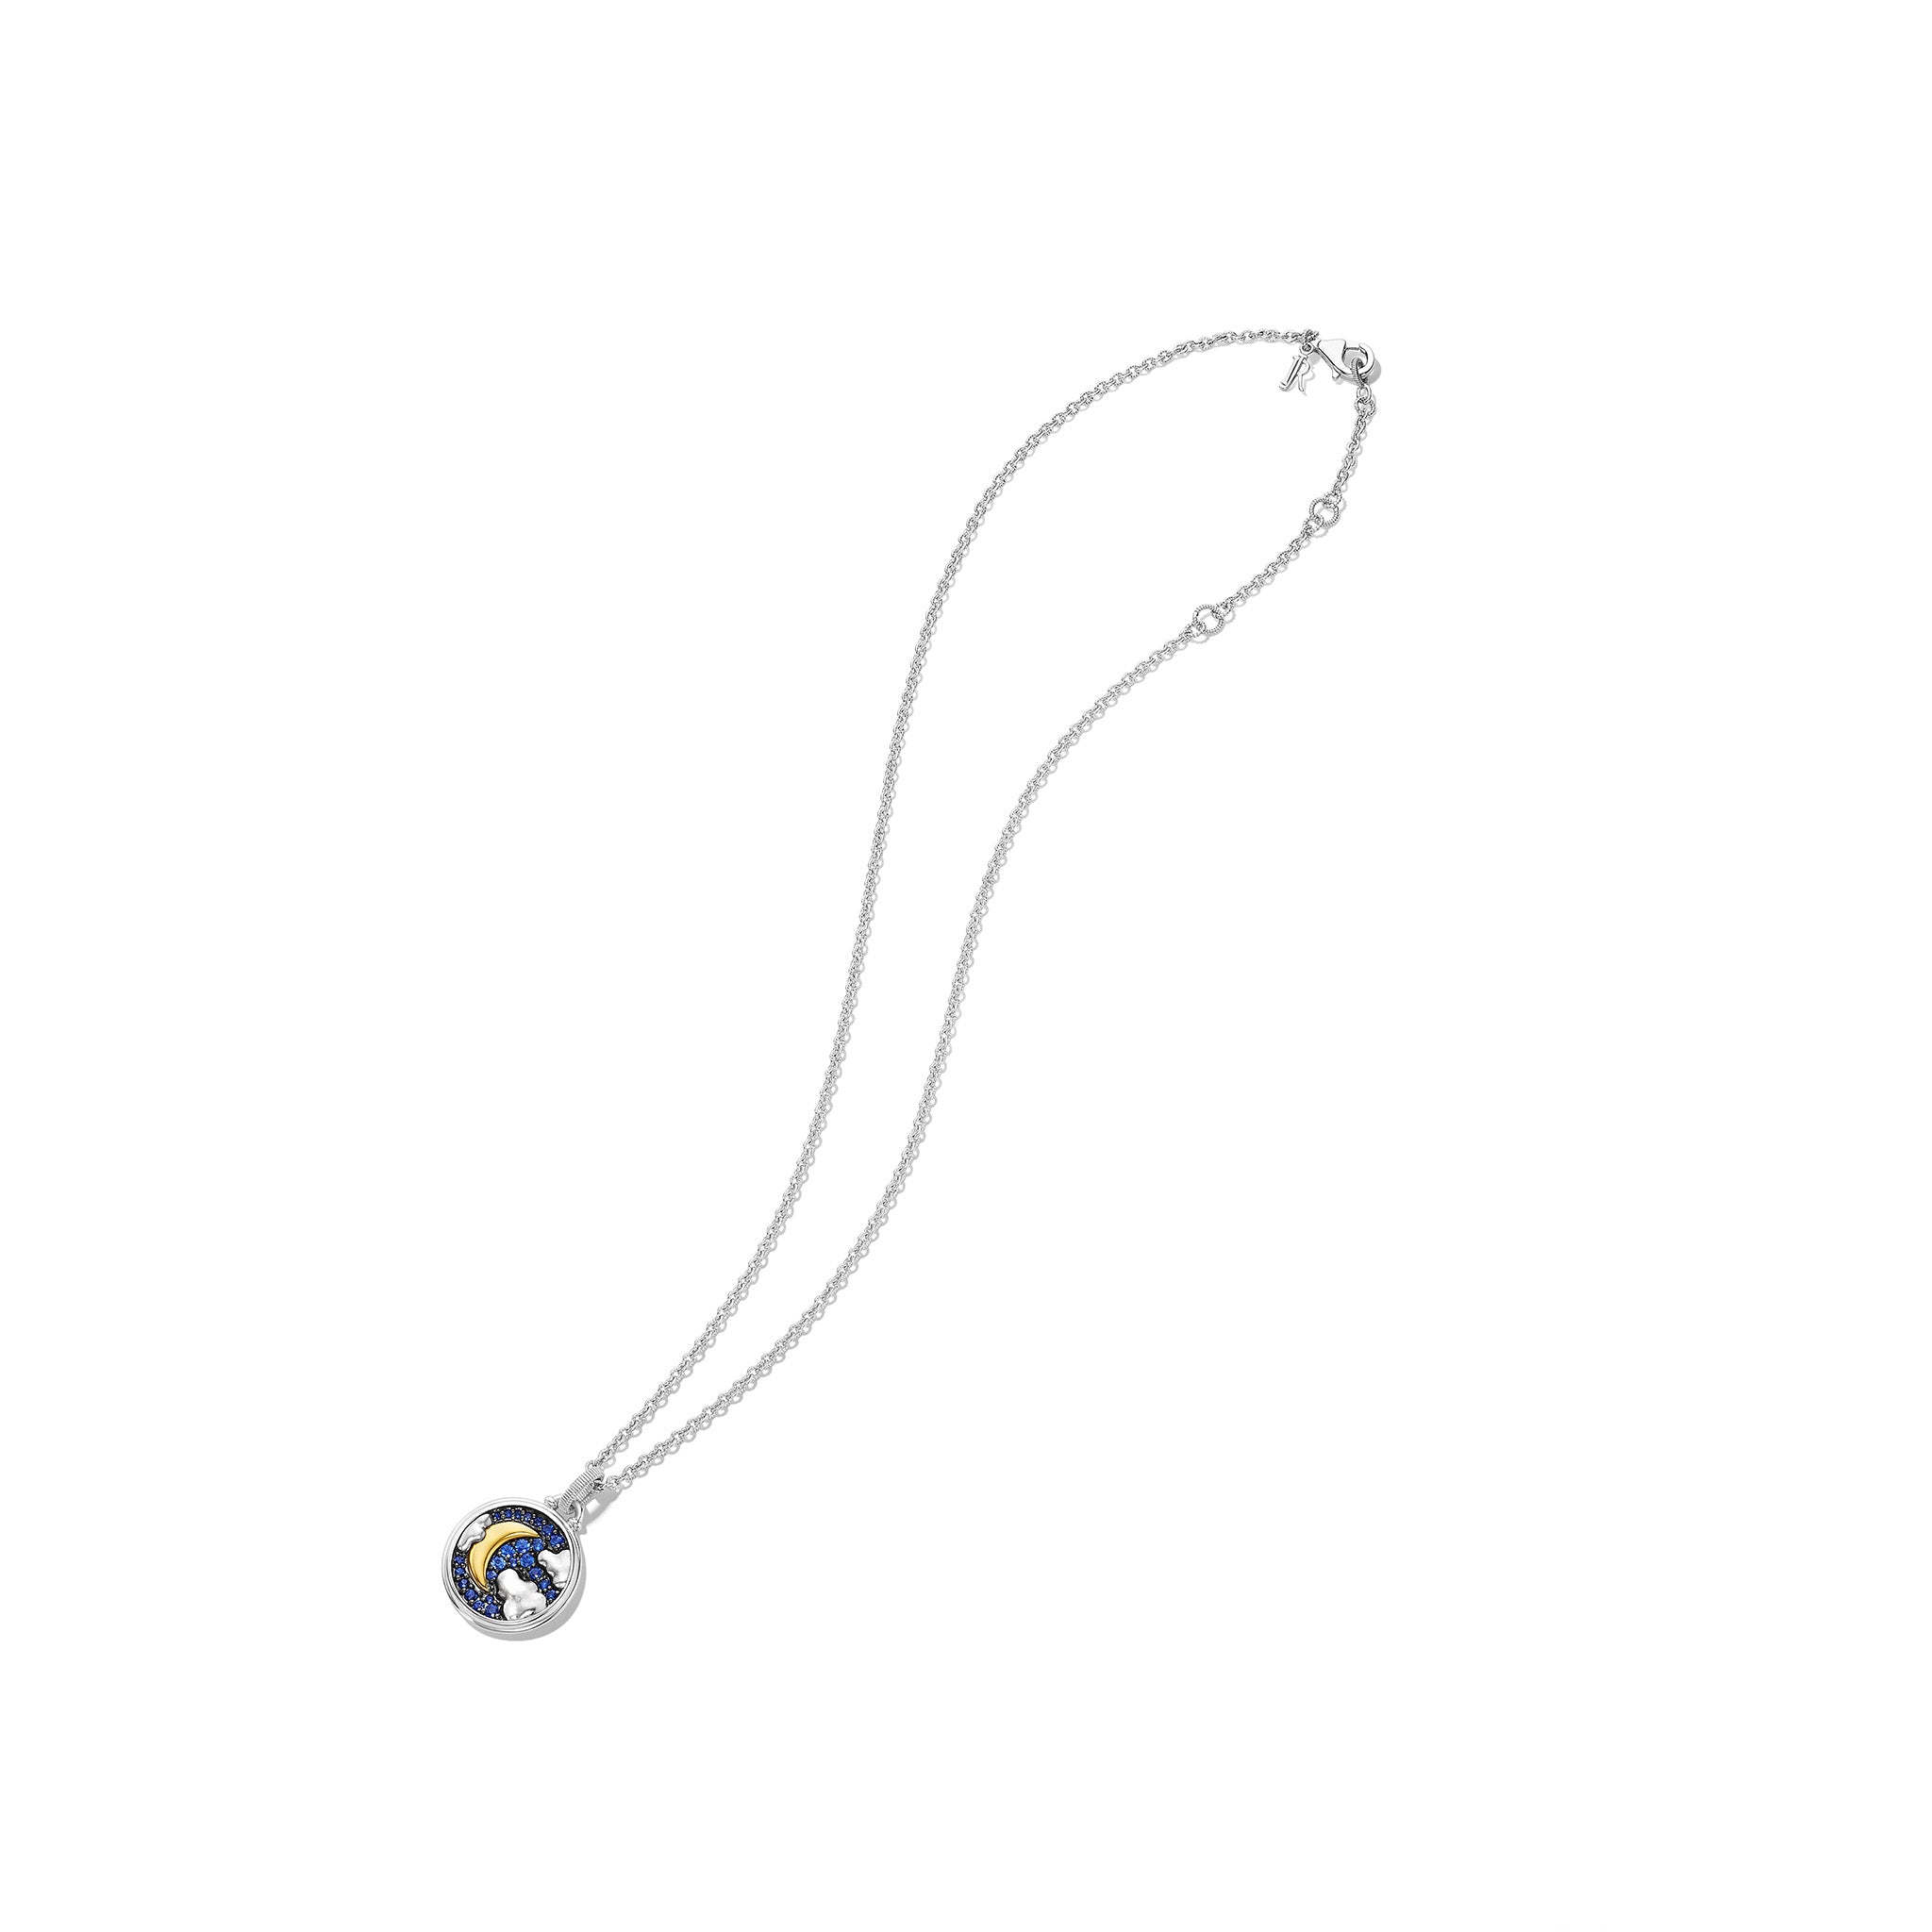 Little Luxuries Night Sky Medallion Necklace with Blue Sapphire, Diamo